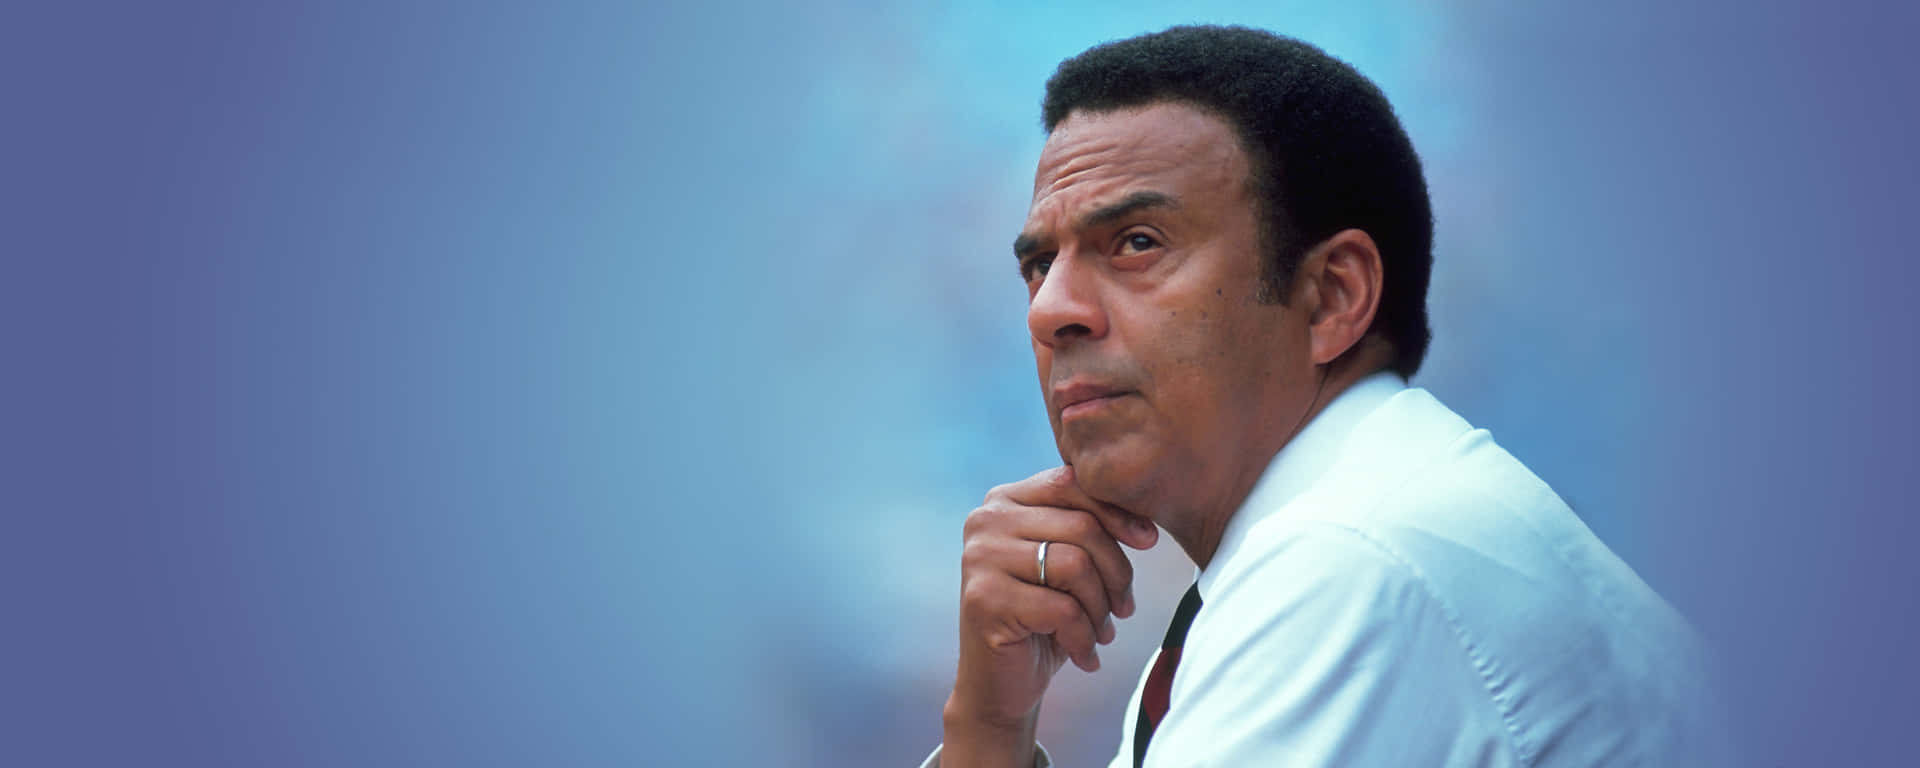 Influential Civil Rights Leader Andrew Young Wallpaper